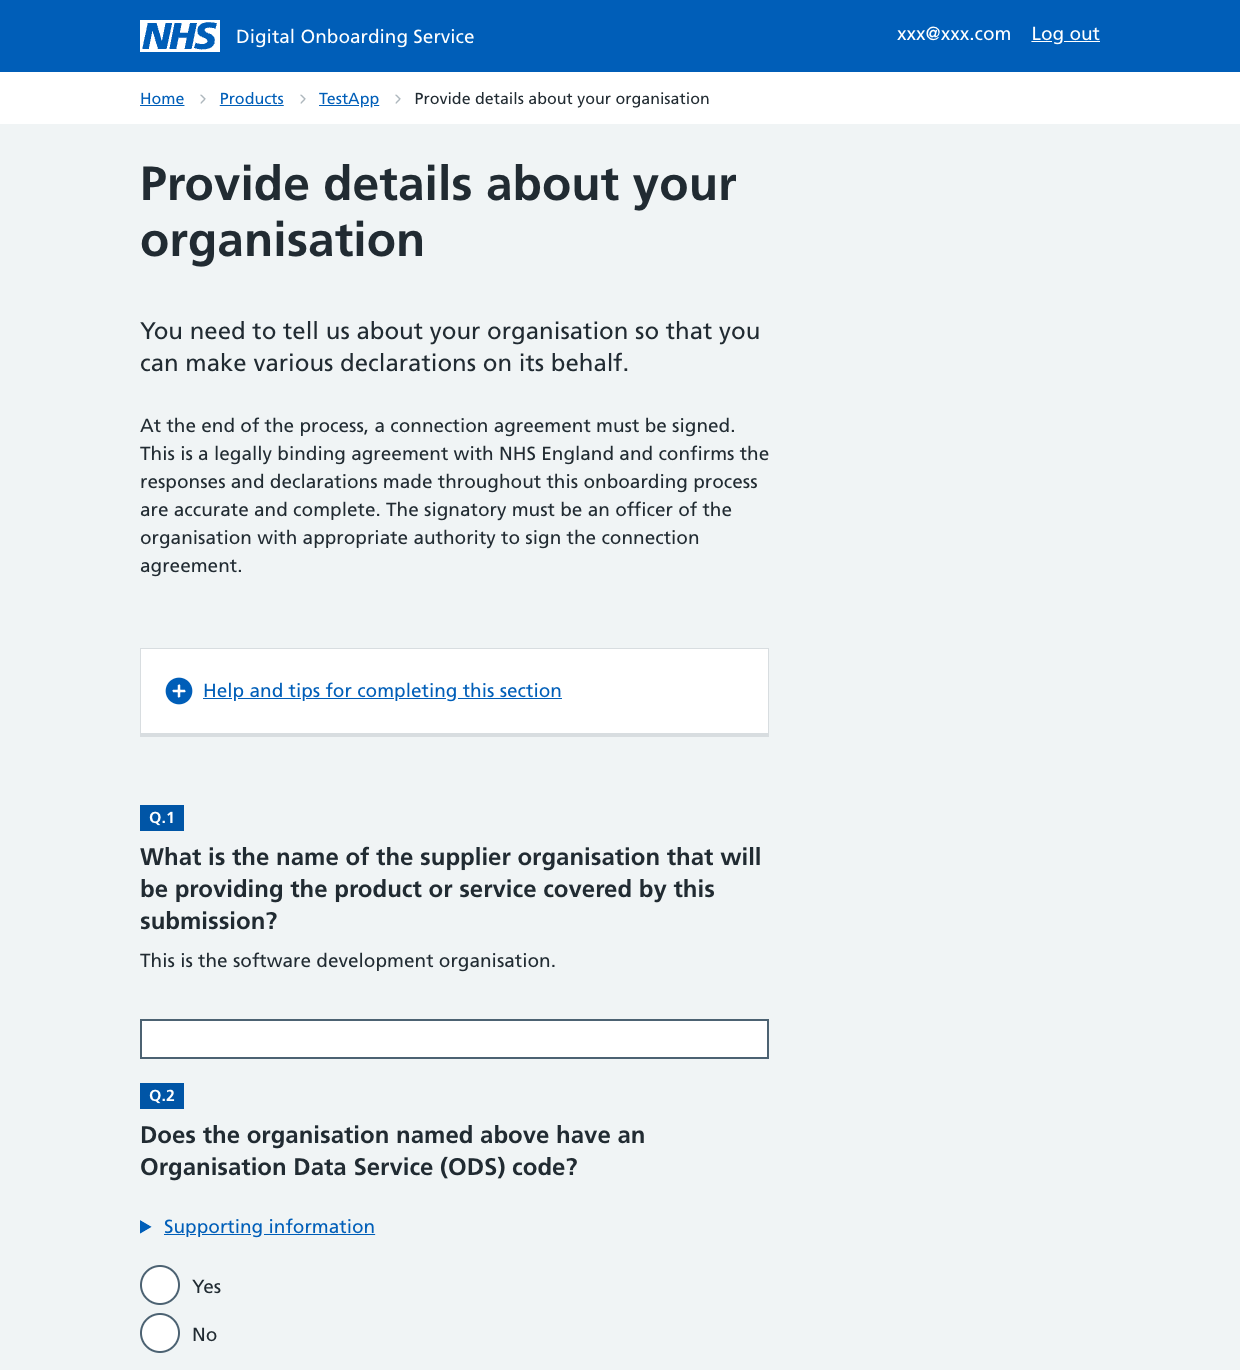 A screenshot of the 'Provide details about your organisation' page